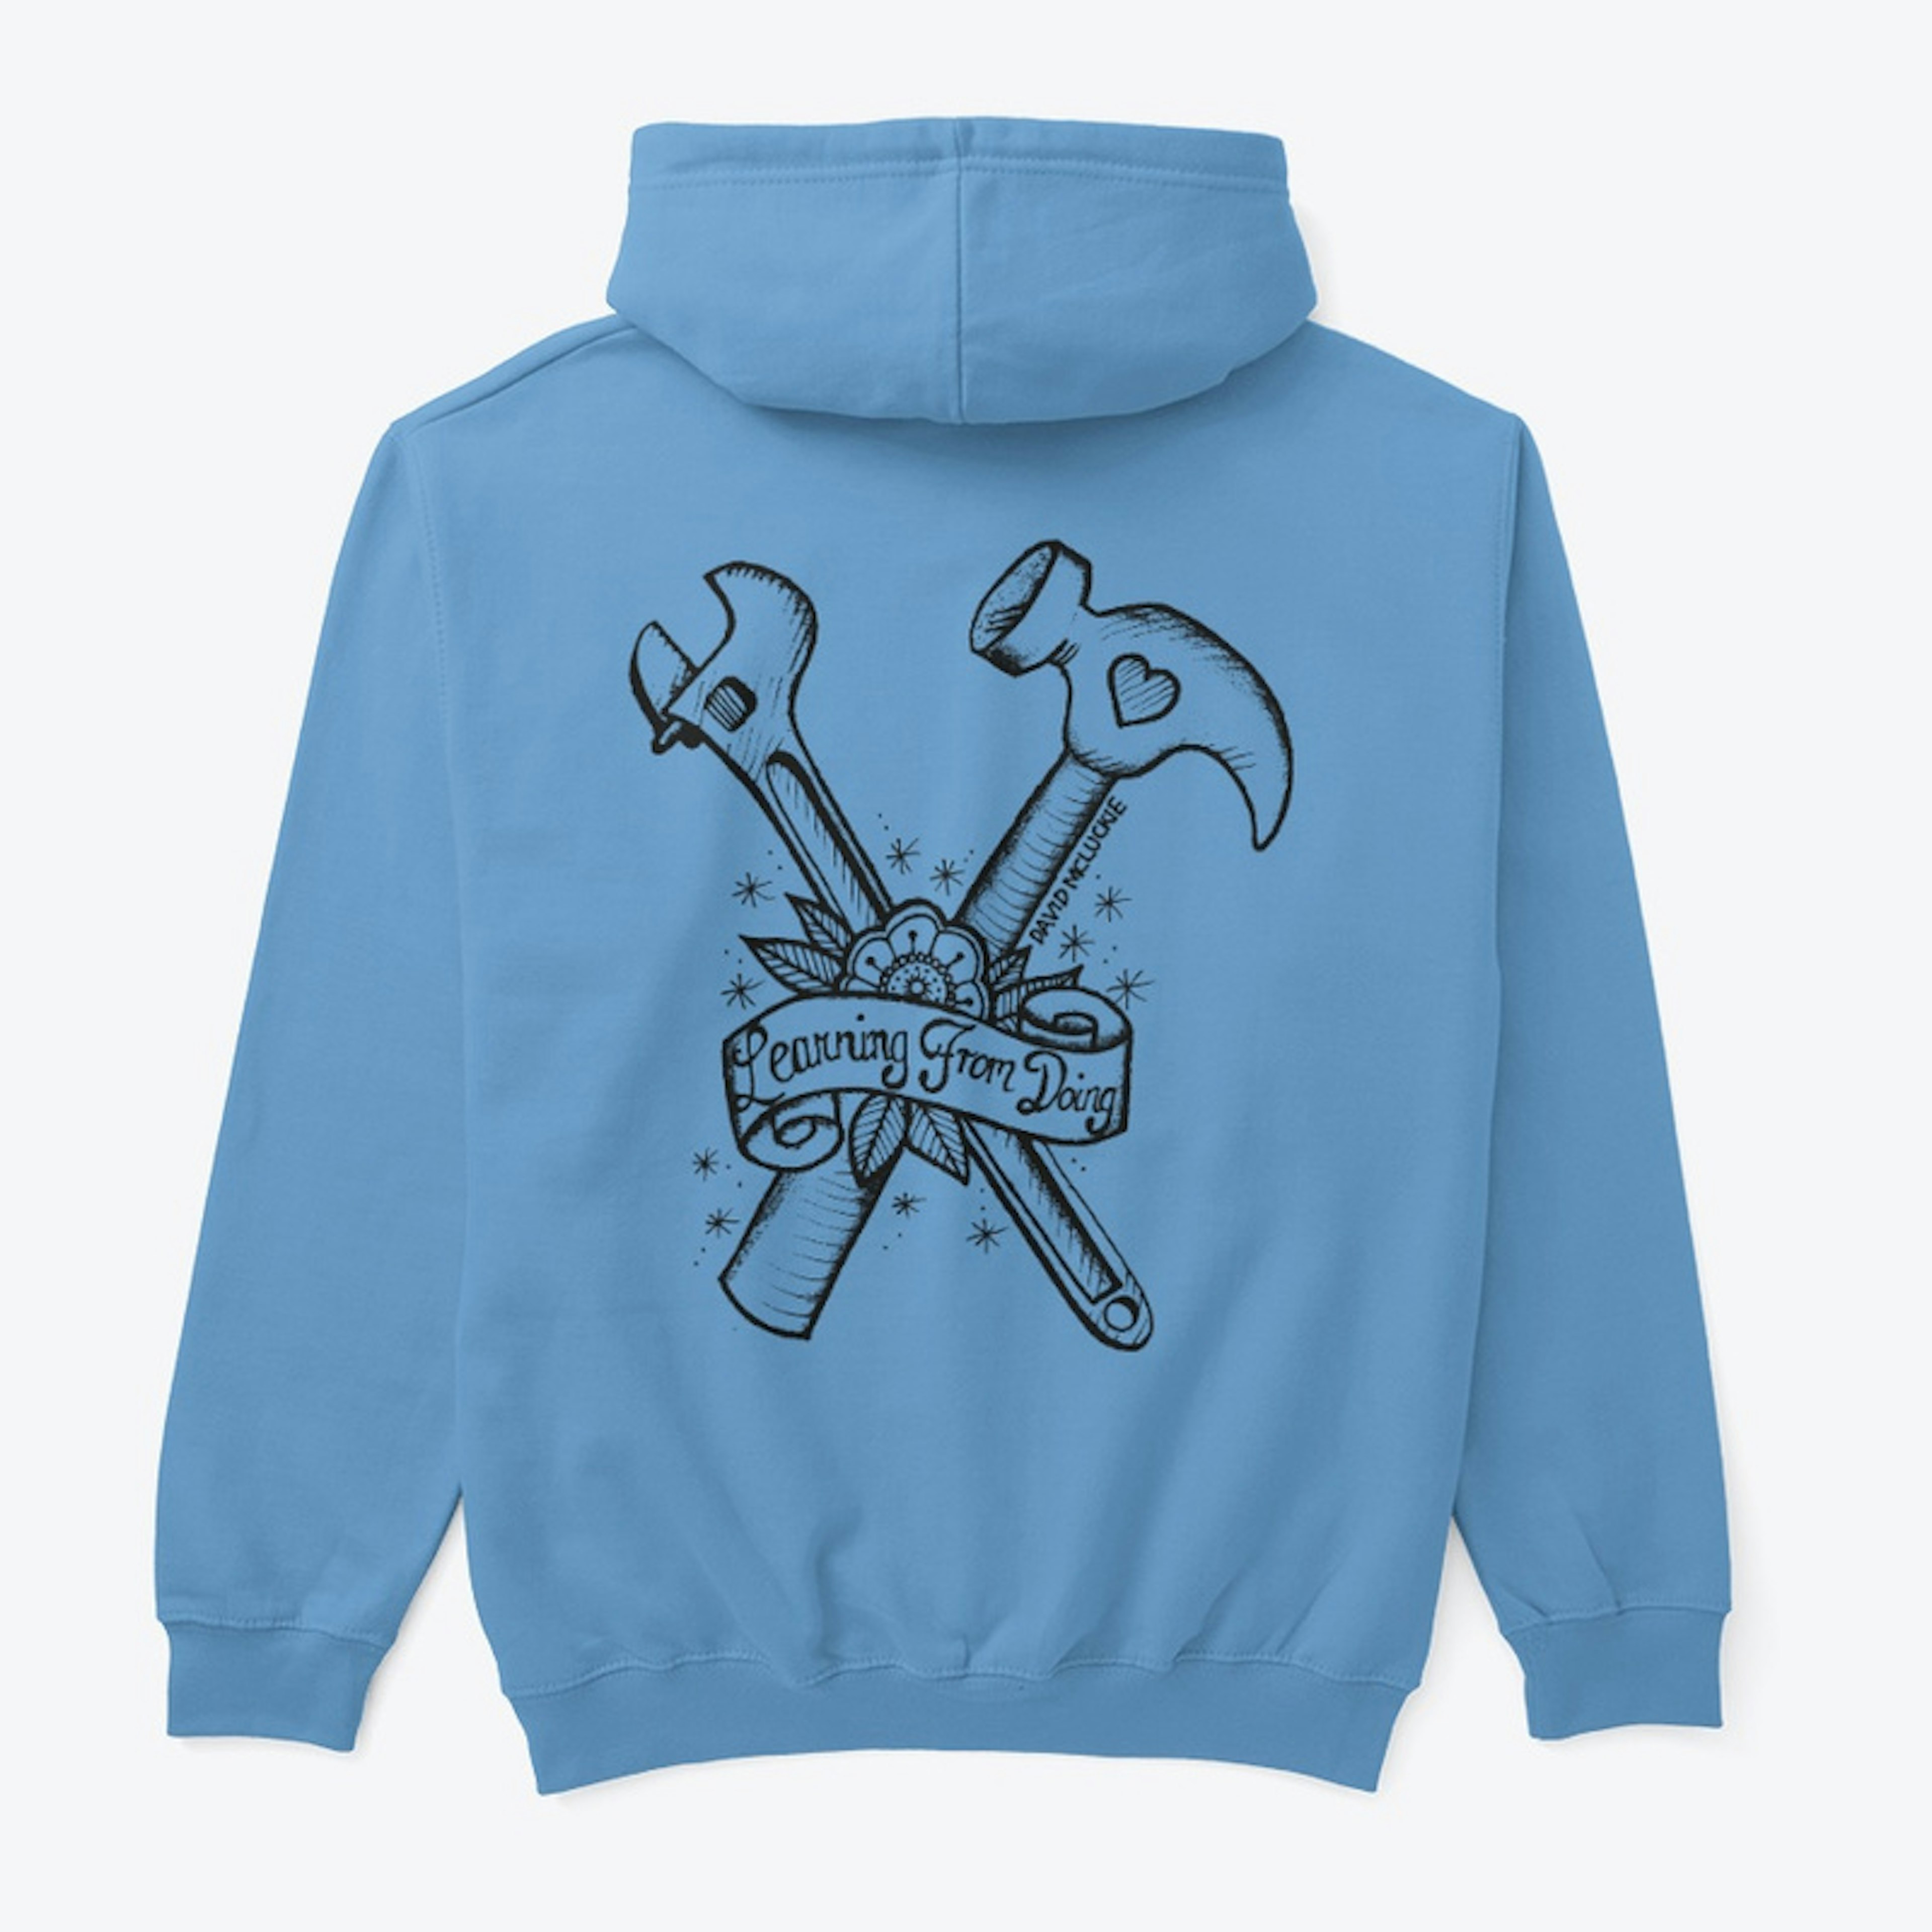 Hoodie with pretty logo